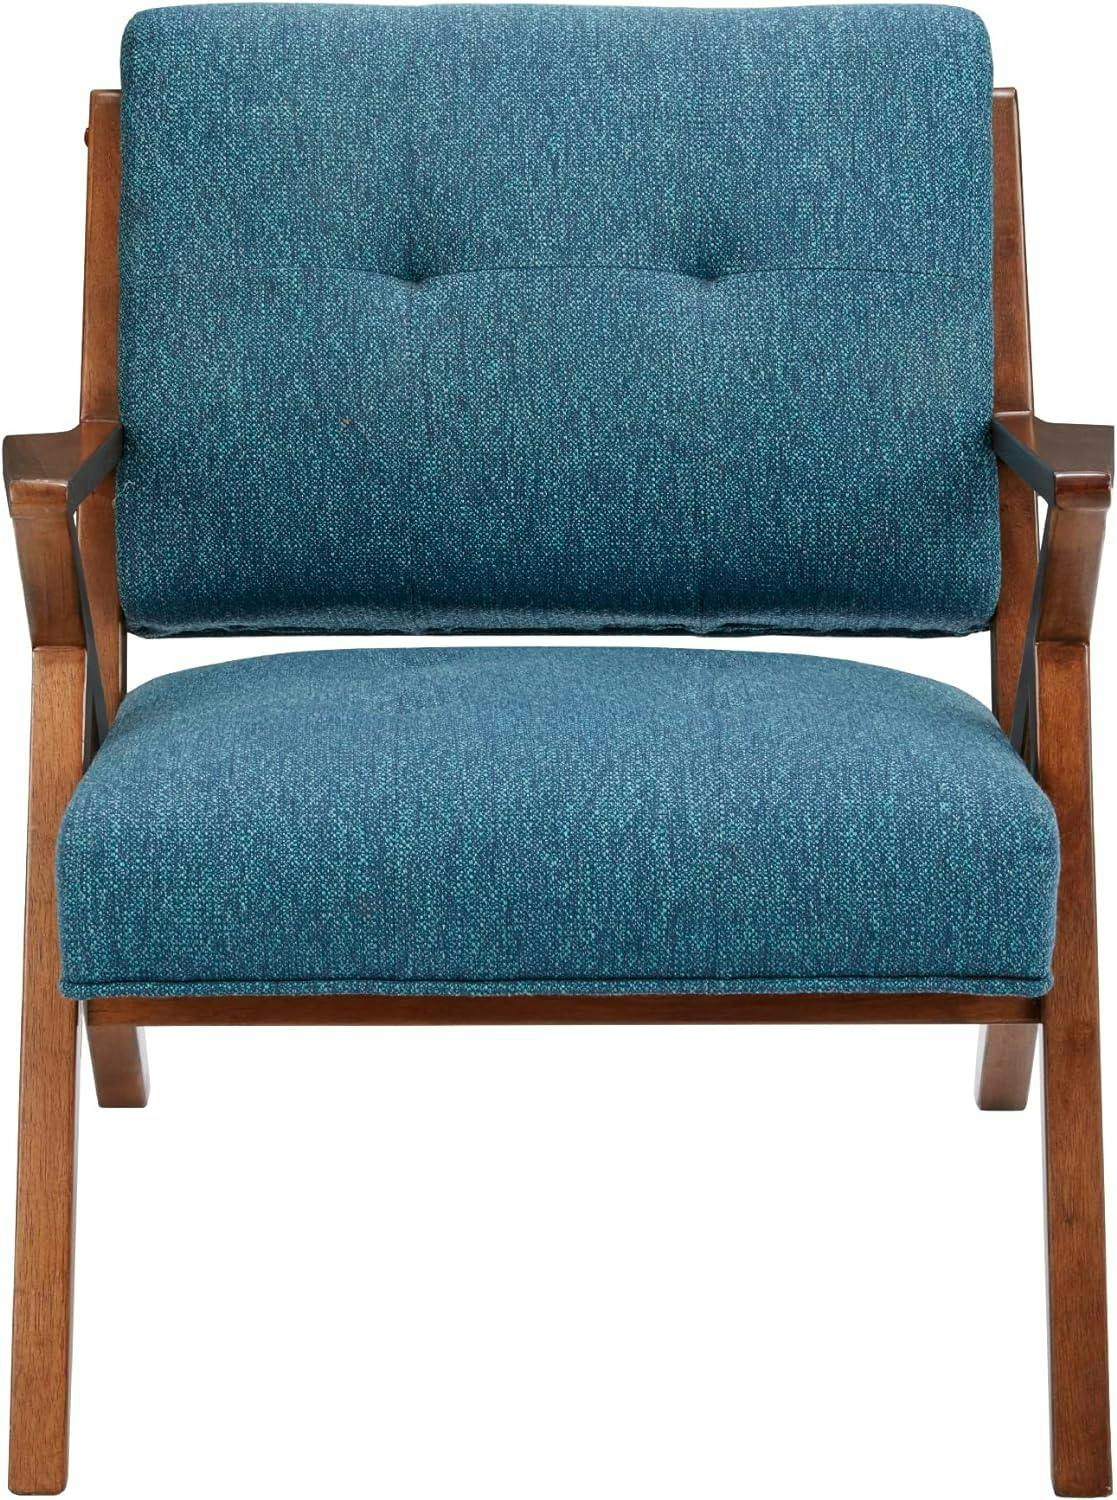 Mid-Century Modern Rocket Lounge Chair in Blue and Pecan